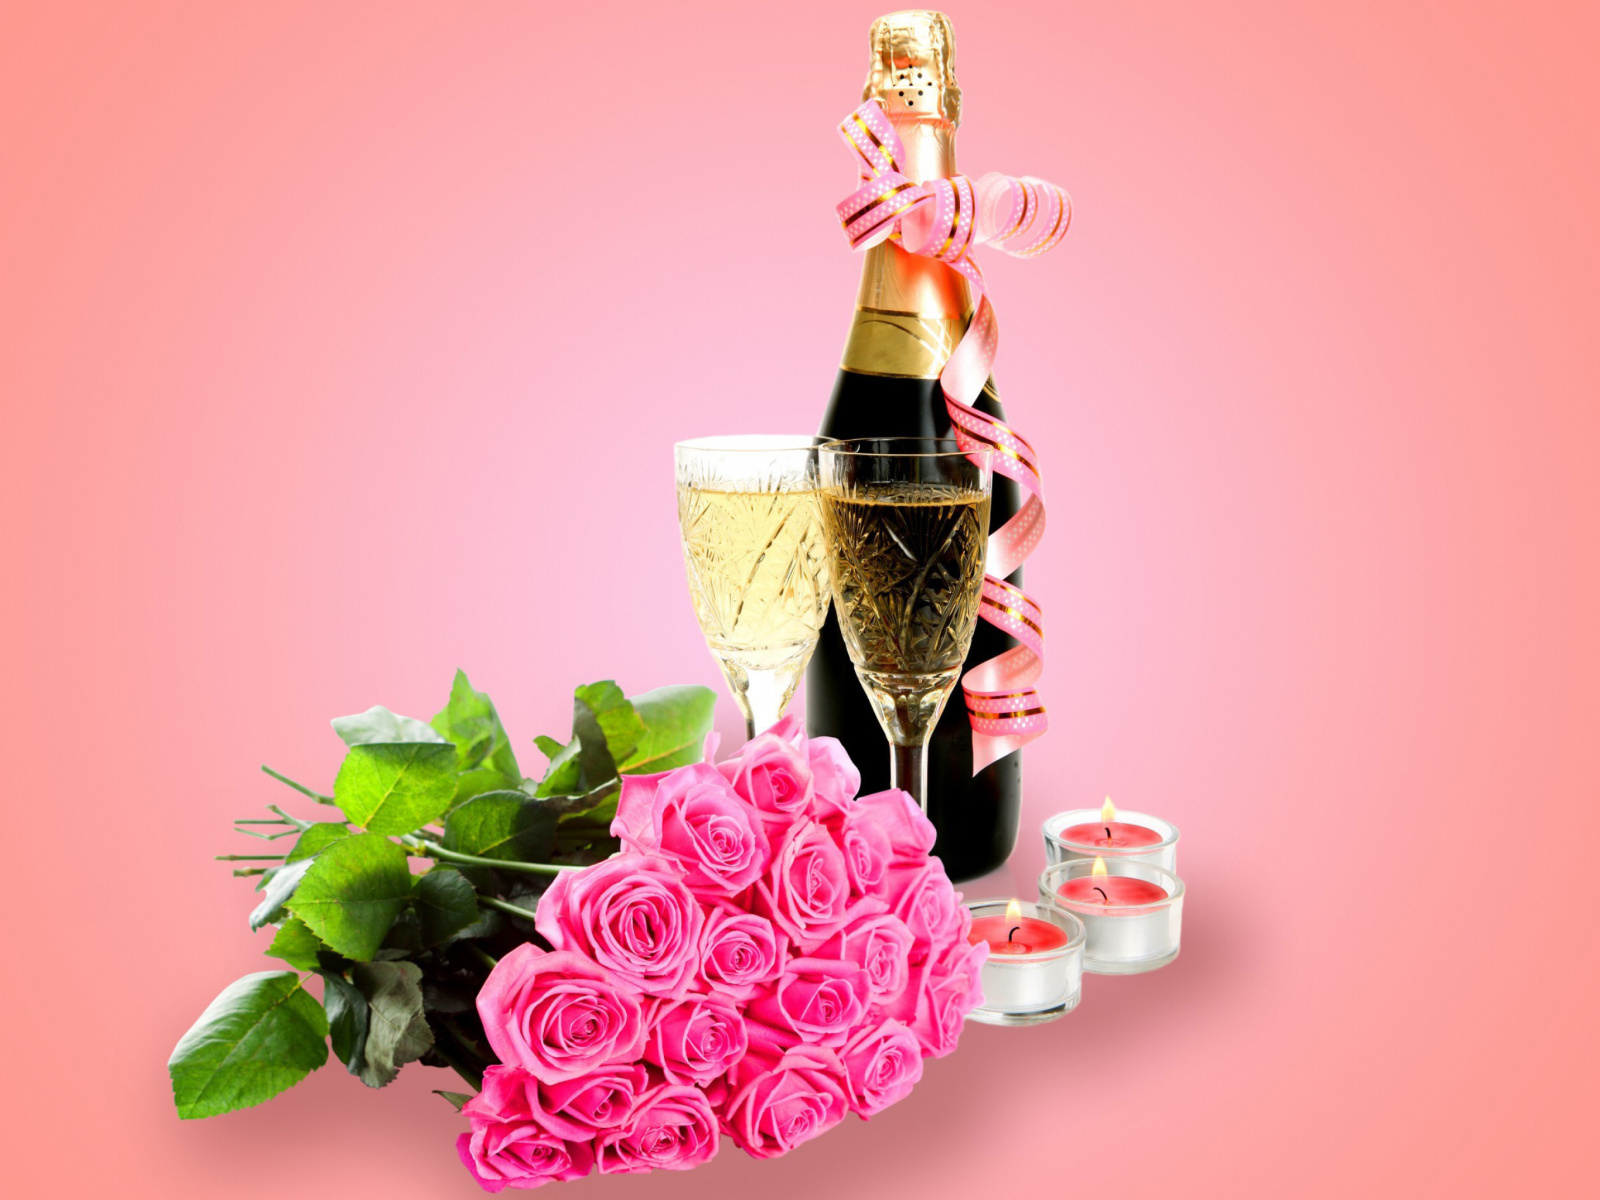 Clipart Roses Bouquet and Champagne screenshot #1 1600x1200